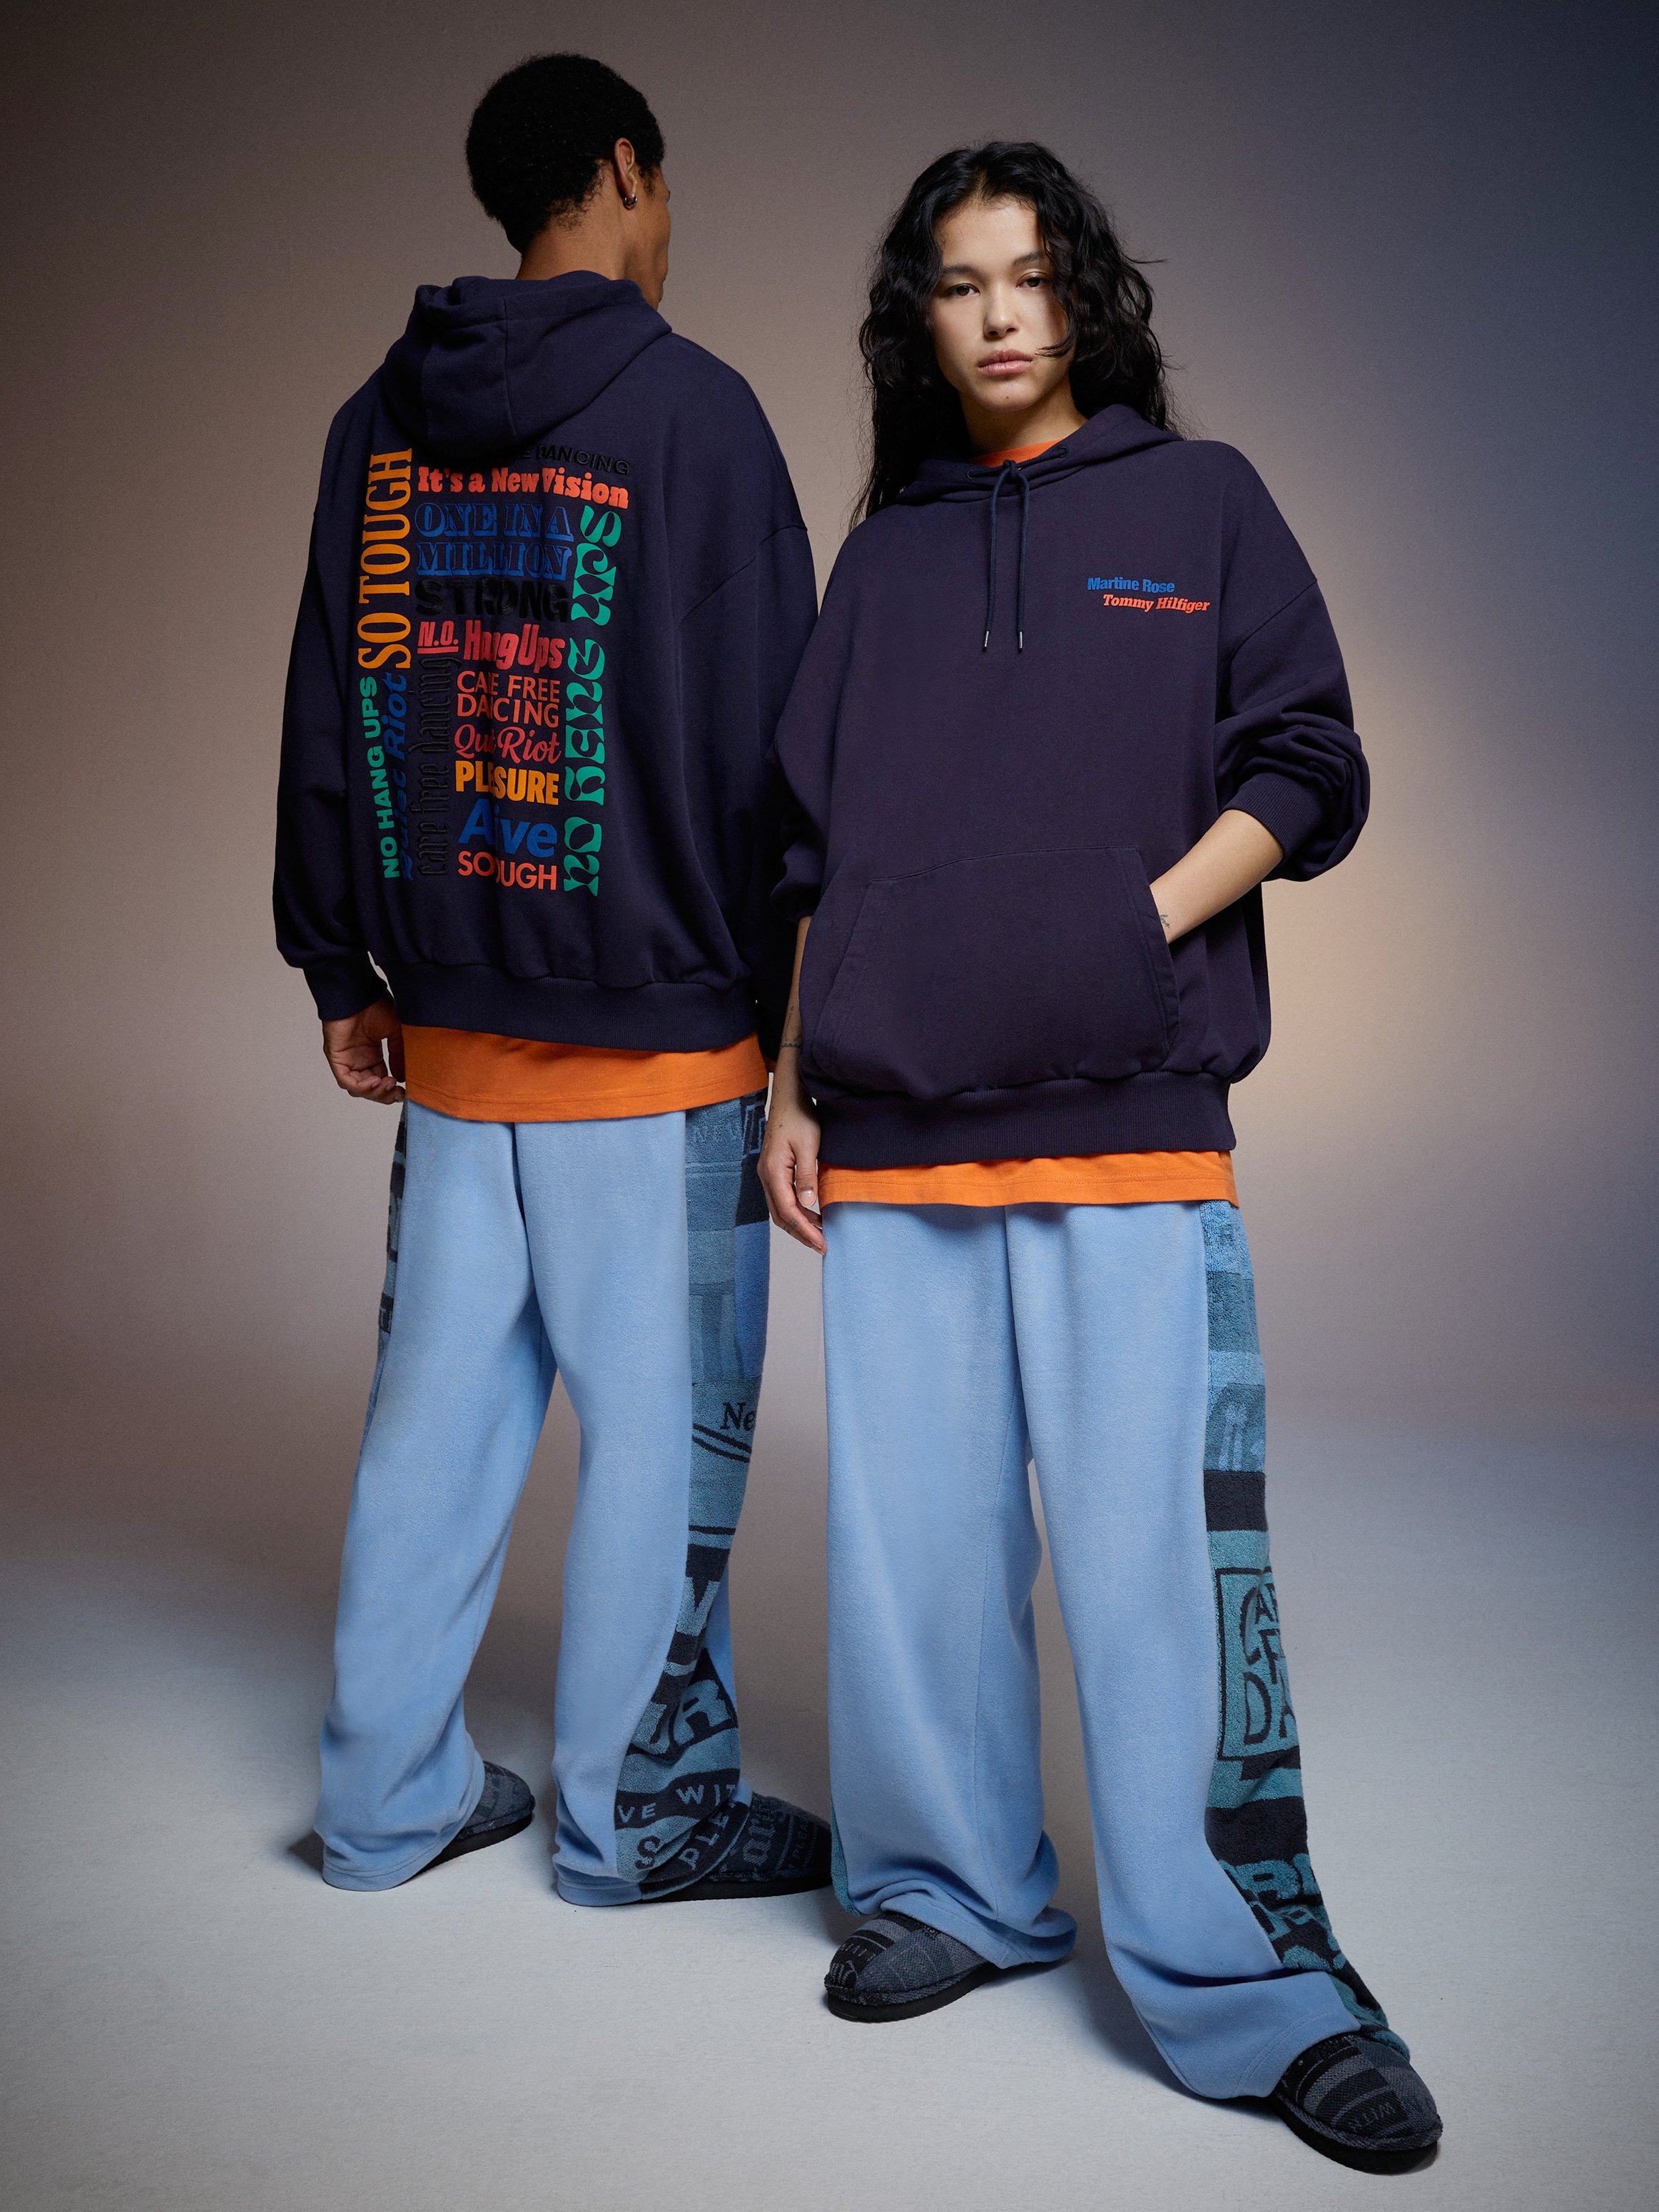 Tommy Hilfiger Announces Tommy Jeans Collaboration British Designer Martine Rose For An Americana-Inspired Capsule Collection — SSI Life